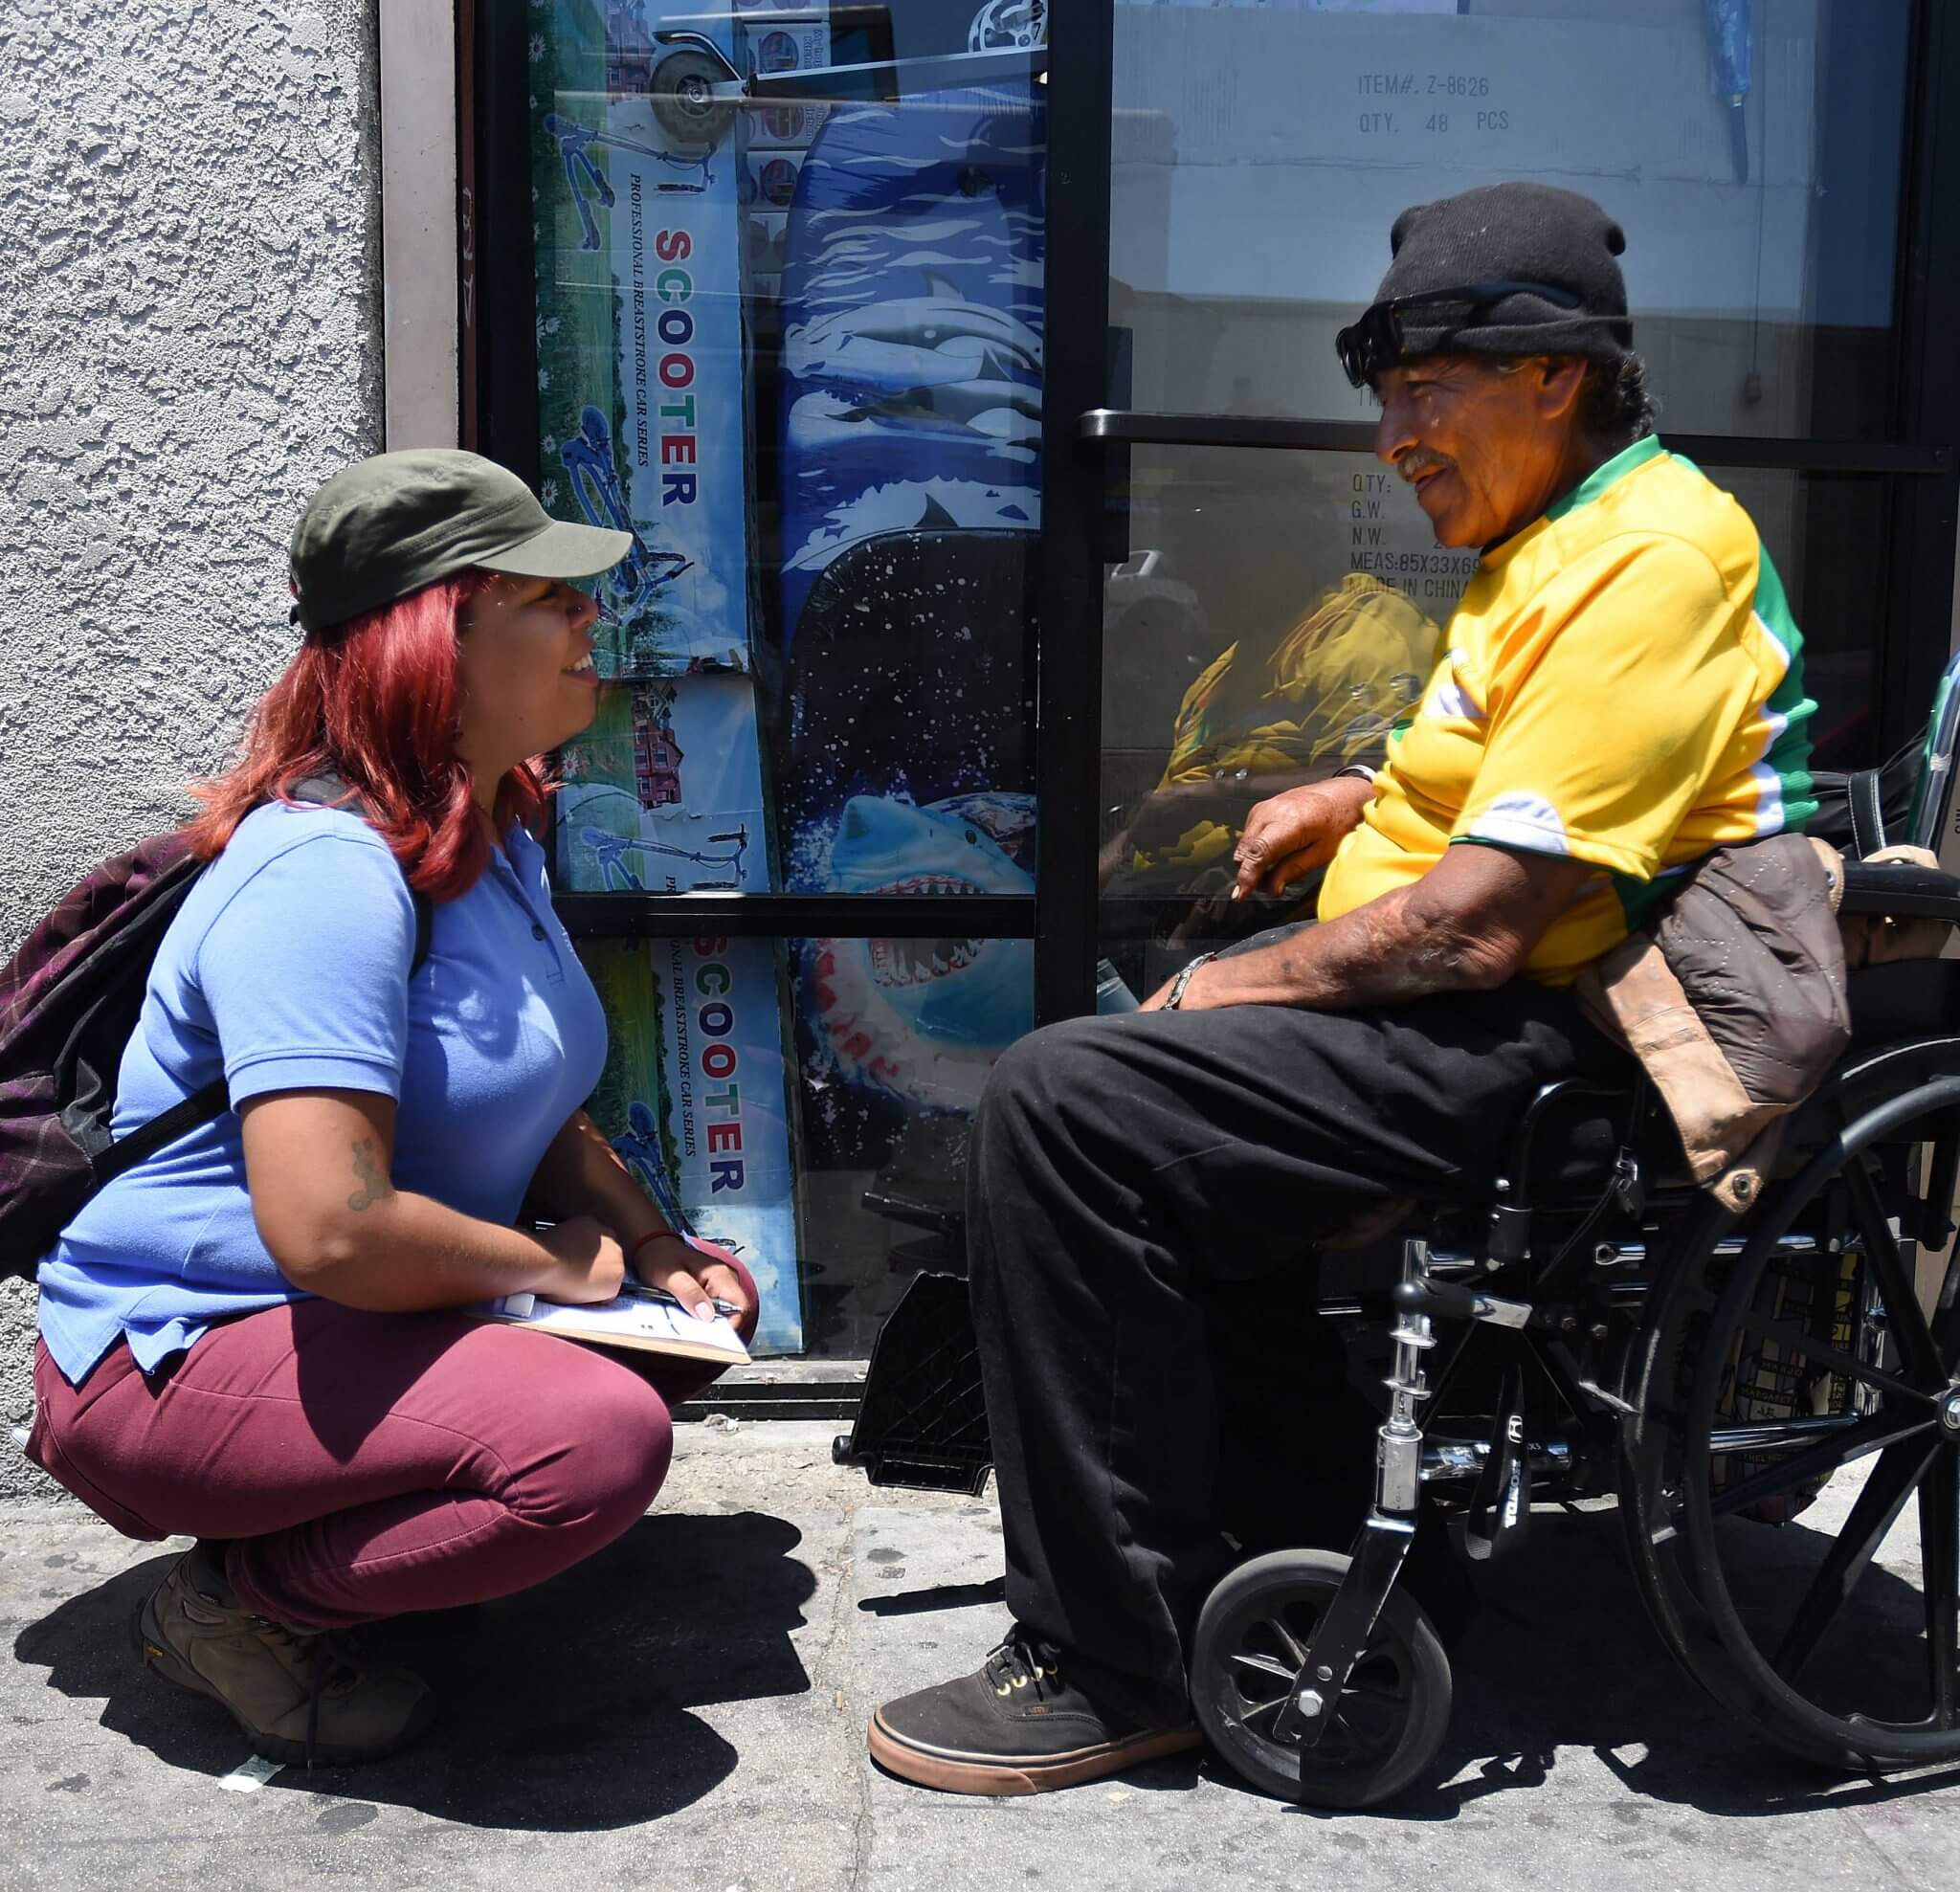 A young woman squats in front of an older man in a wheelchair as they smile at each other.